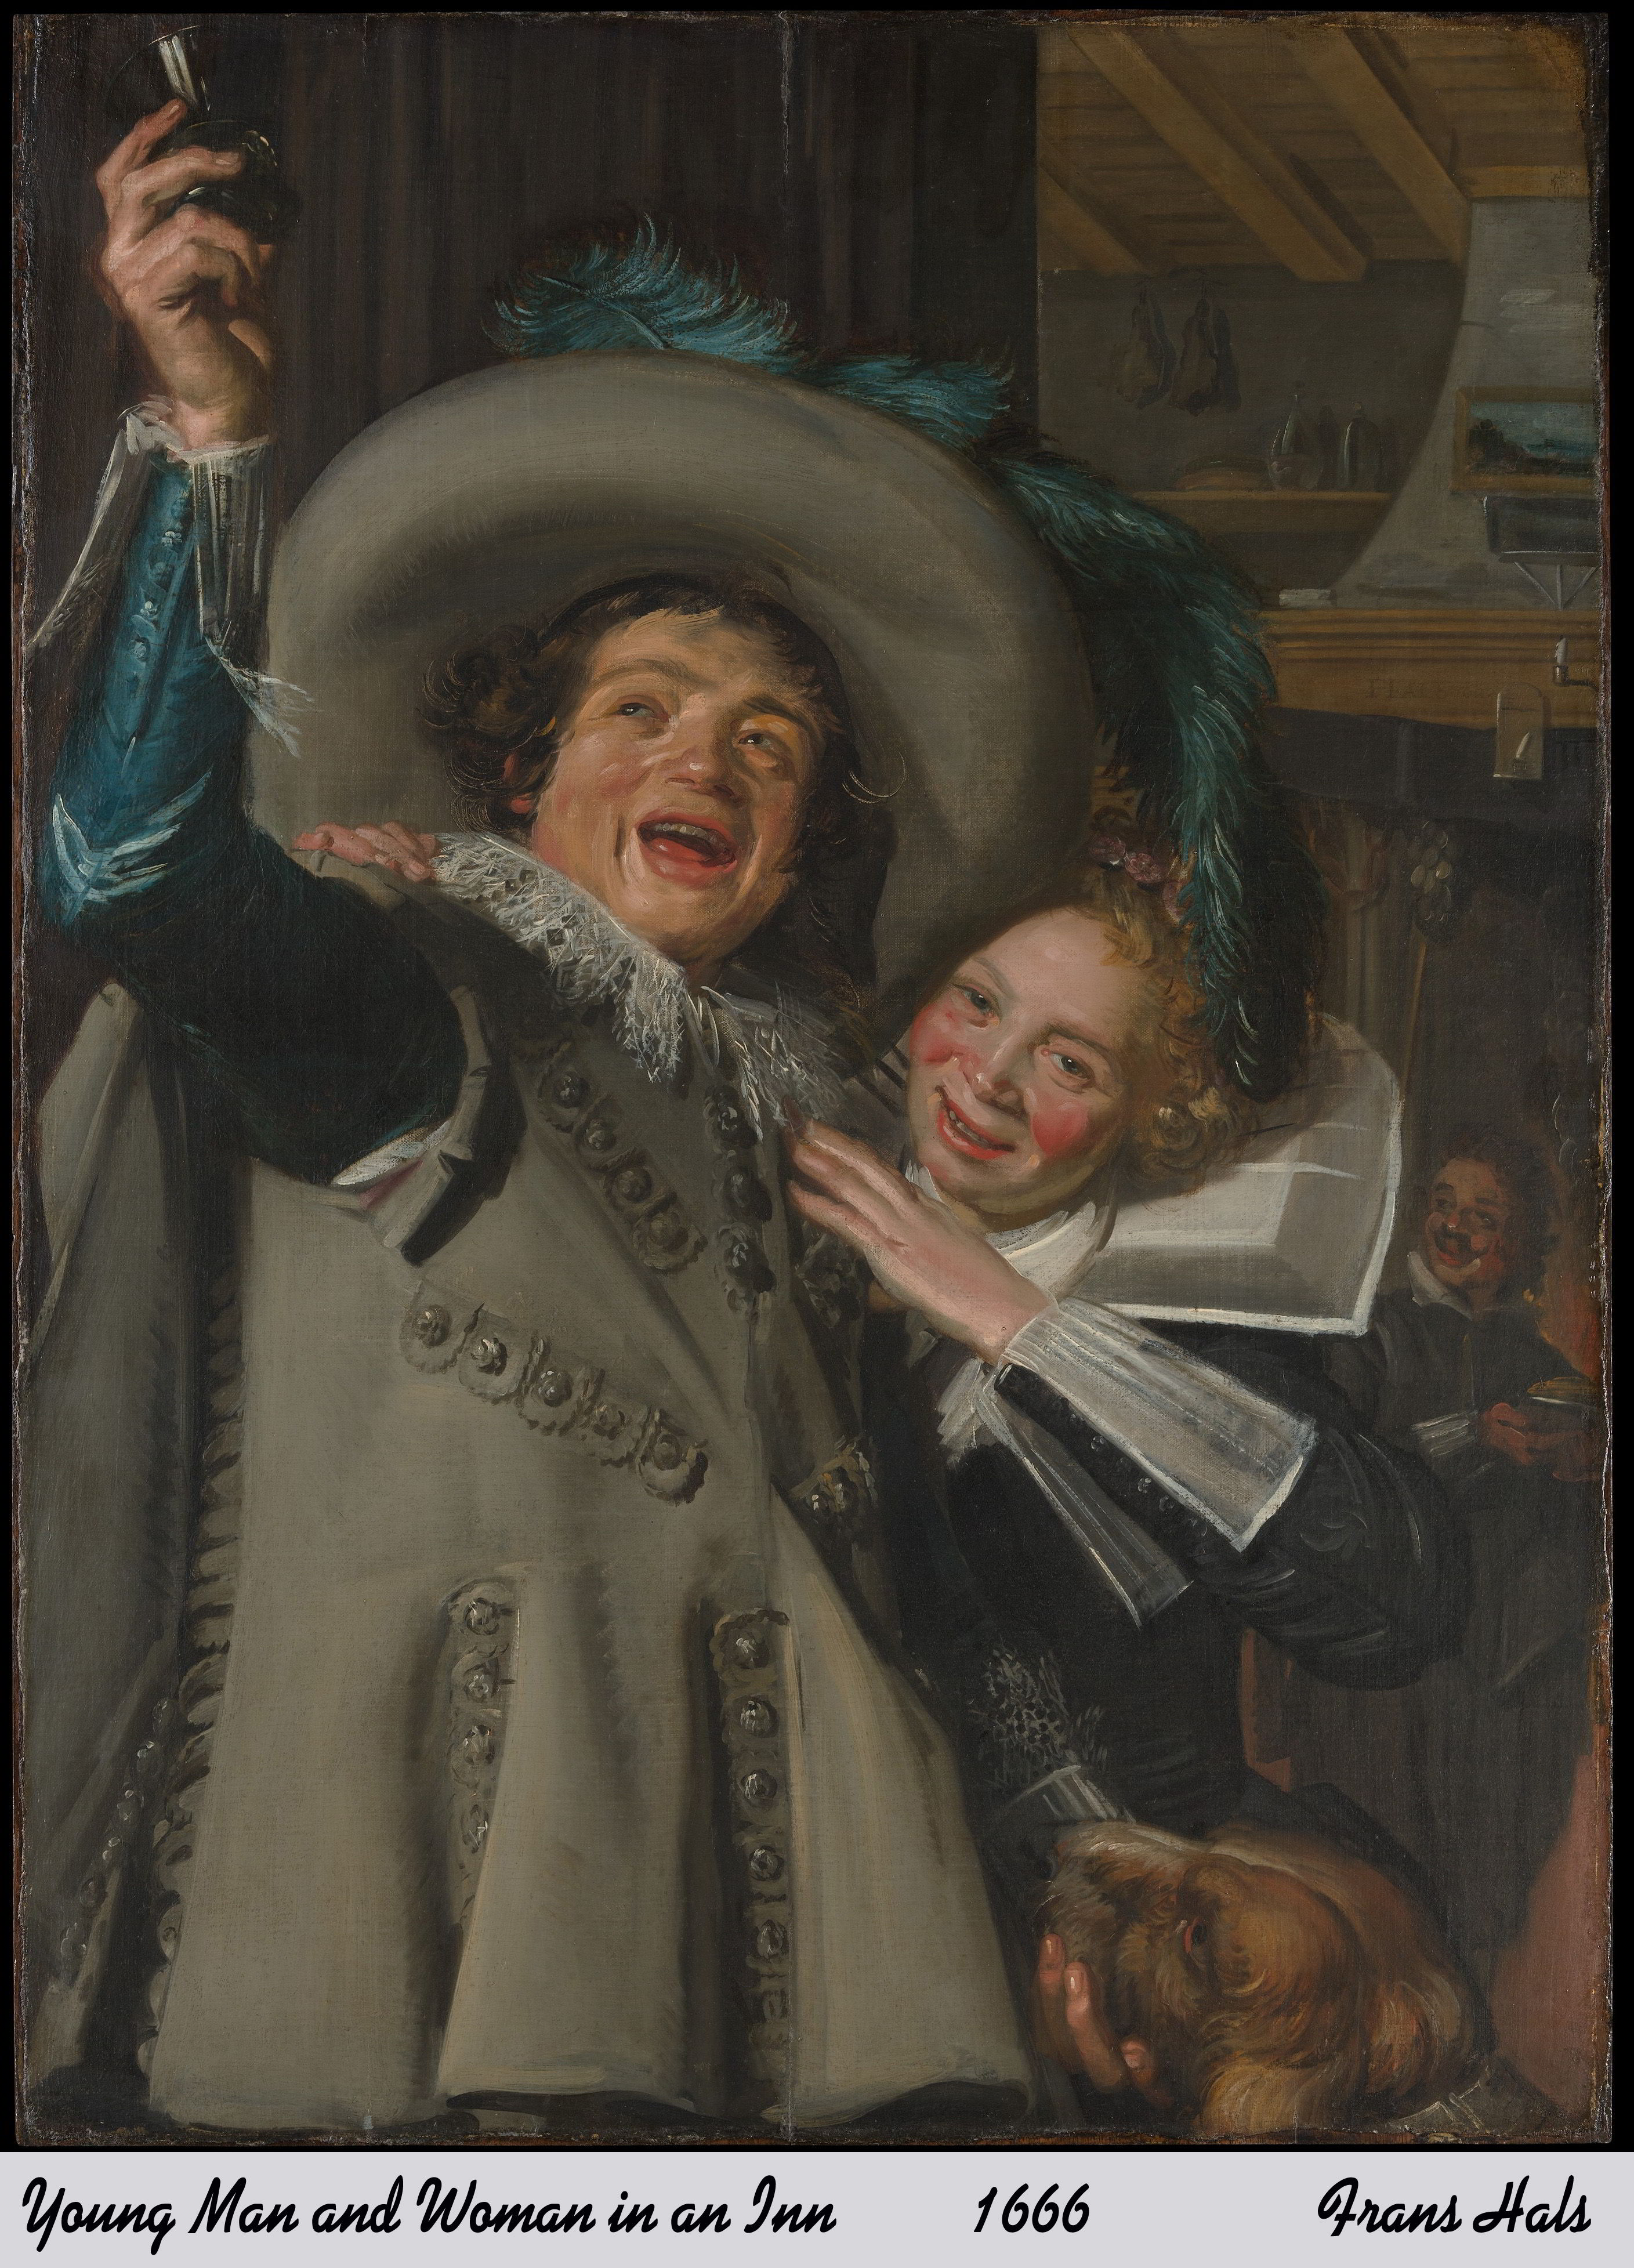 Young Man and Woman in an Inn by Frans Hals copy